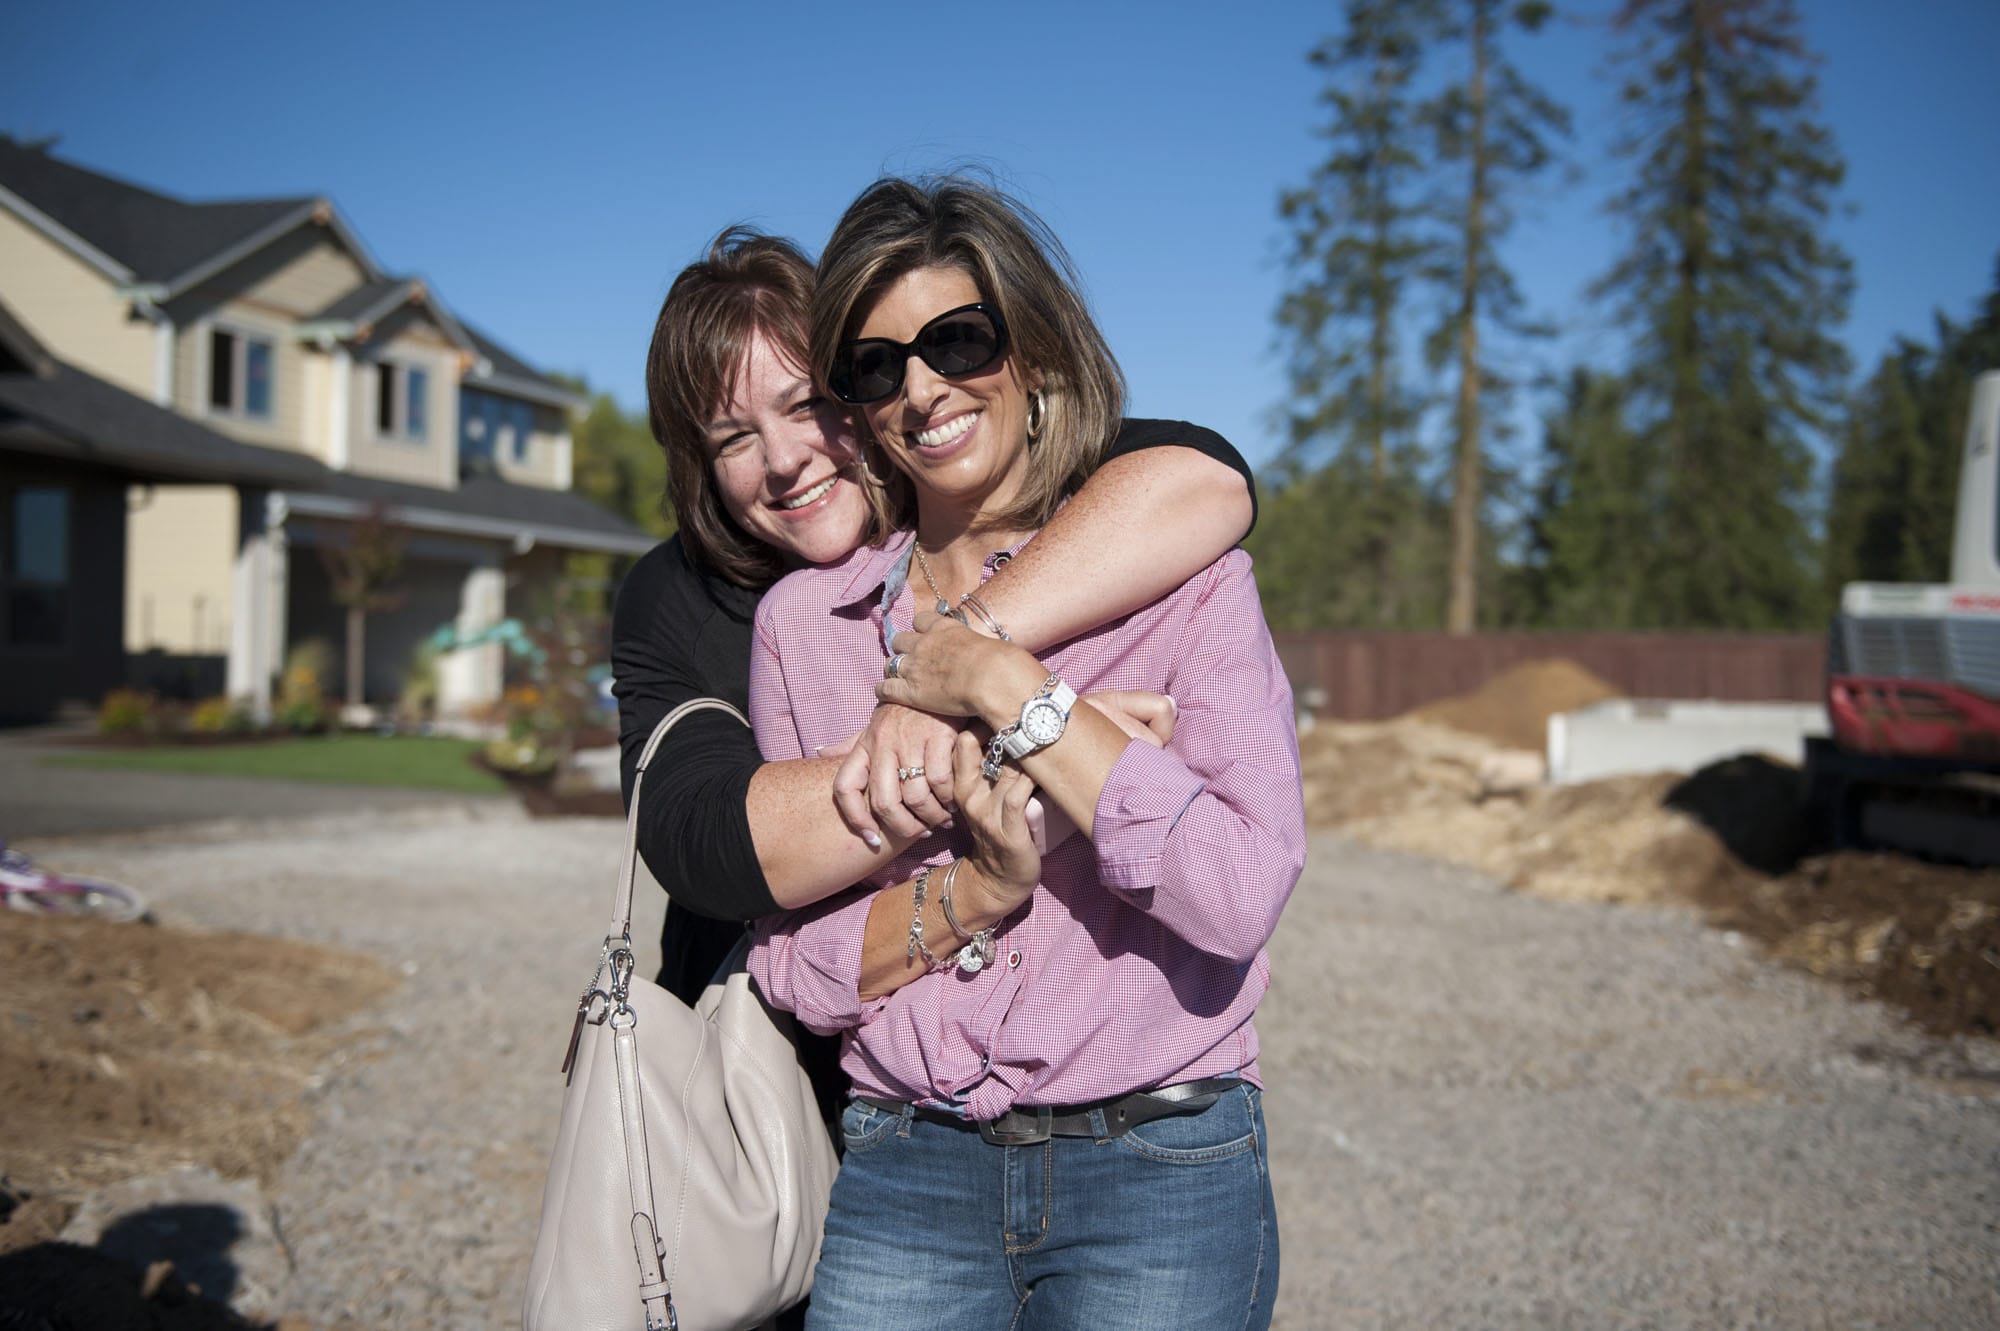 Tiffany Johnson, left, embraces her longtime friend Shelly Johnson at the site of Shelly and her husband, Craig’s, new home. Tiffany Johnson created a nonprofit group, Raise the Roof Foundation, to raise money to build the Johnsons a new home.